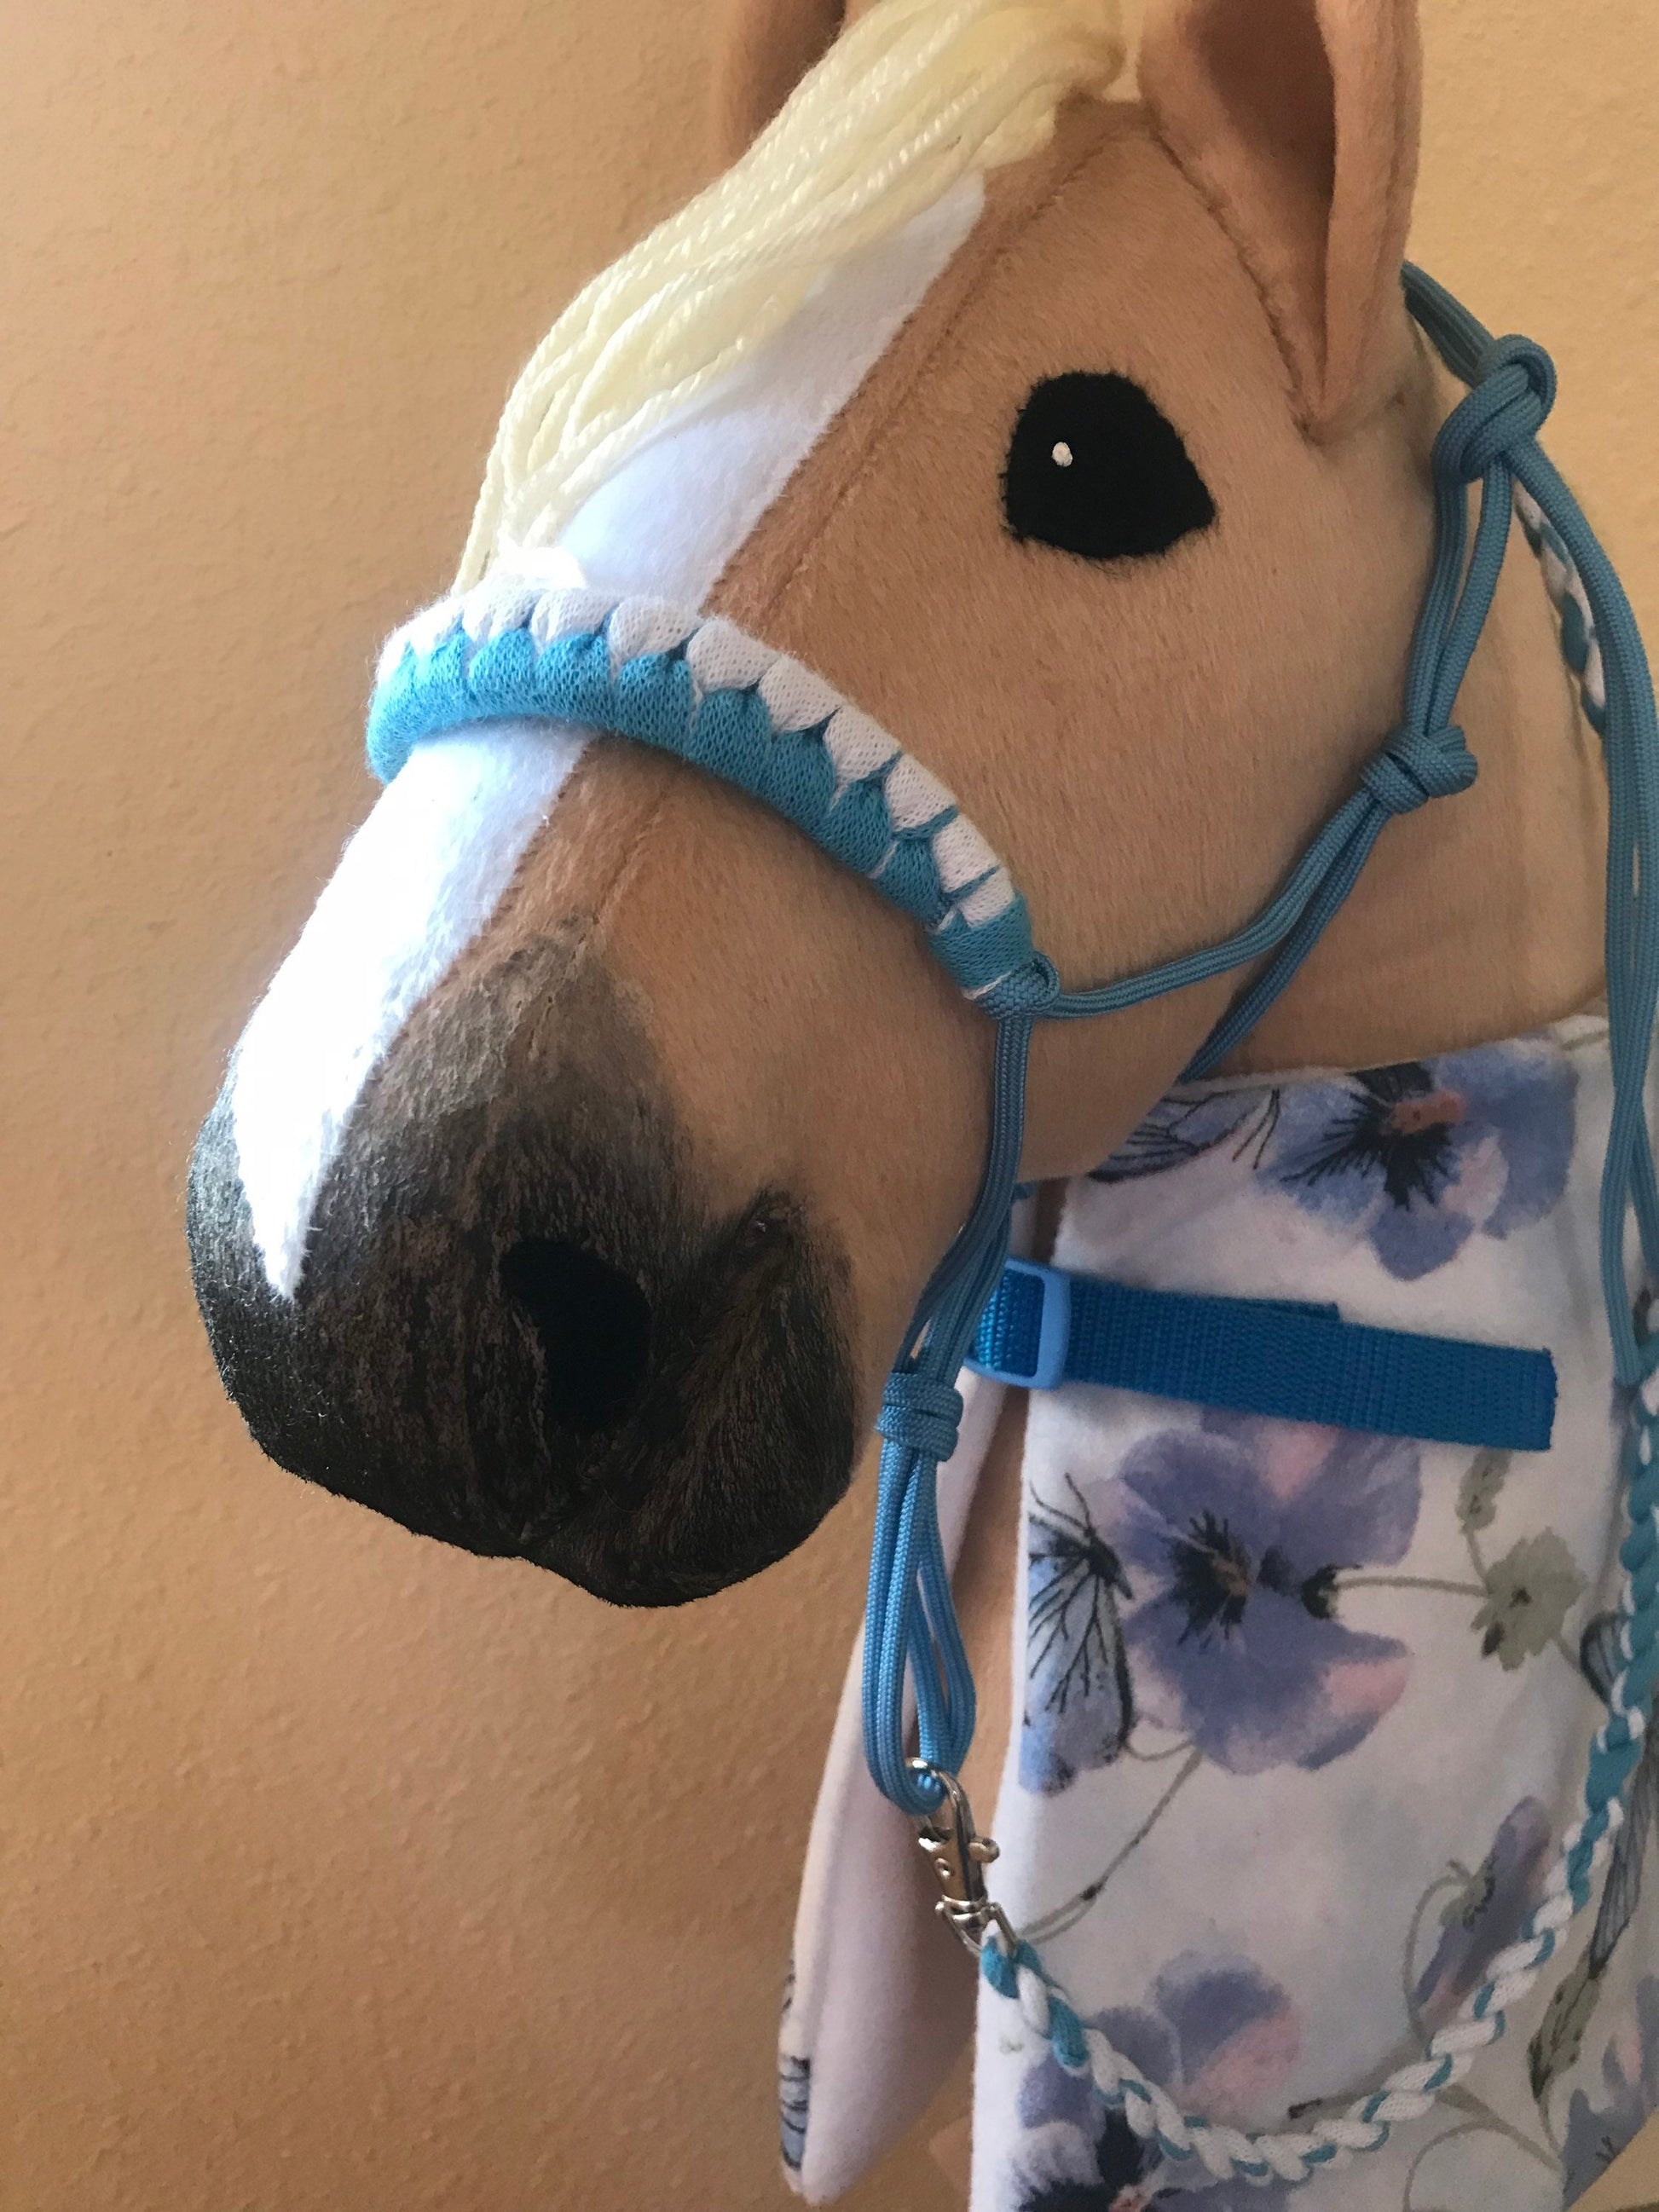 Hobby horse tack set rope halter+blanket+lead rope blue free shipping, hobby horse accessories